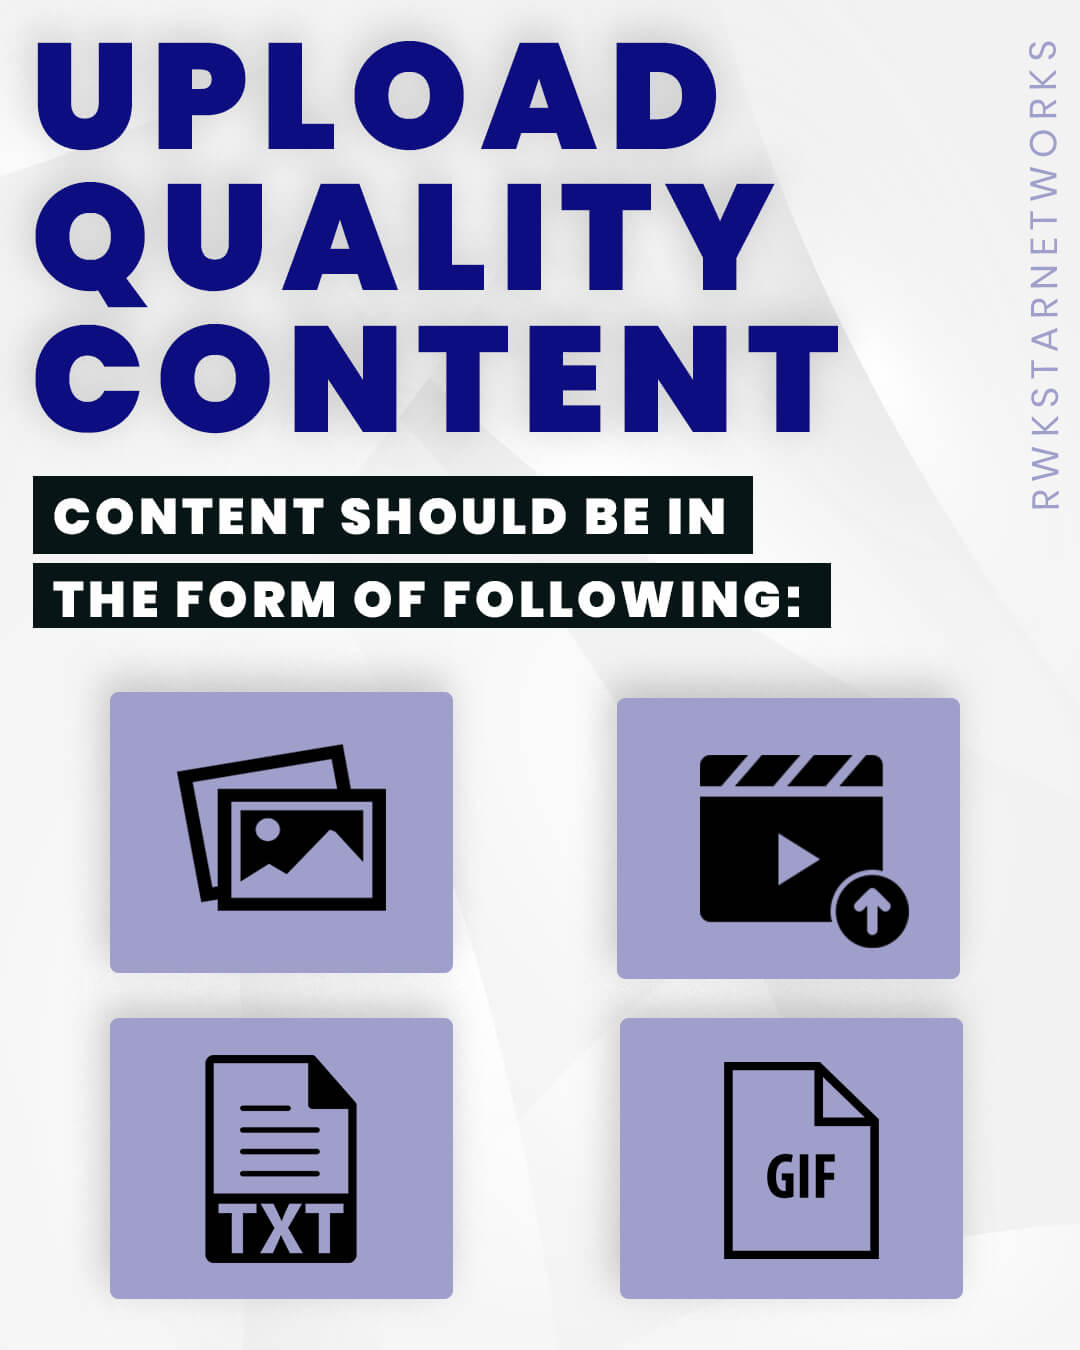 Upload Quality Content